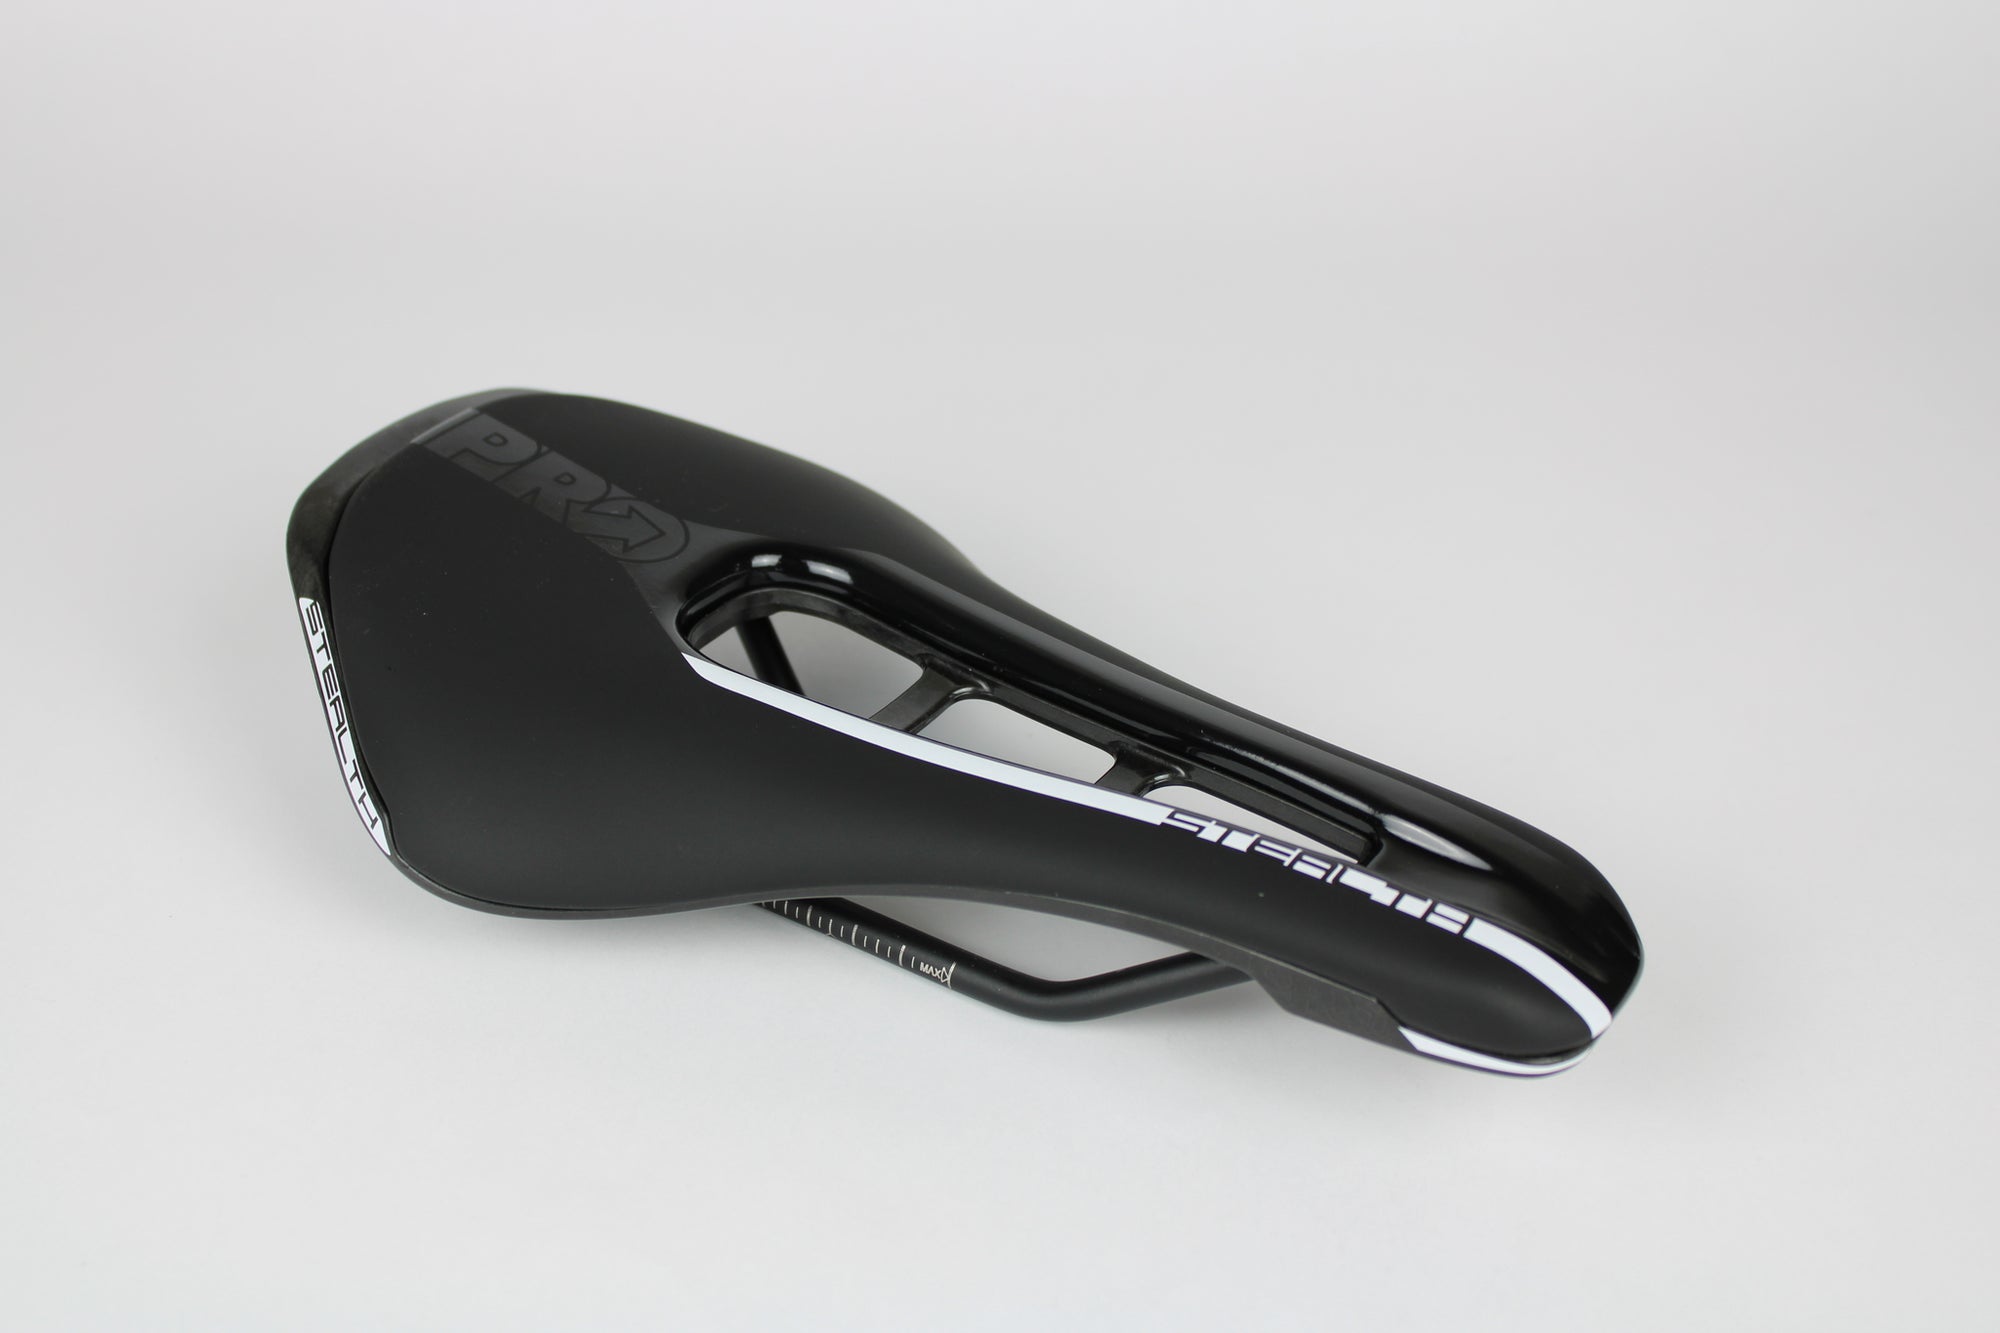 SHIMANO PRO STEALTH CARBON SADDLE REVIEW